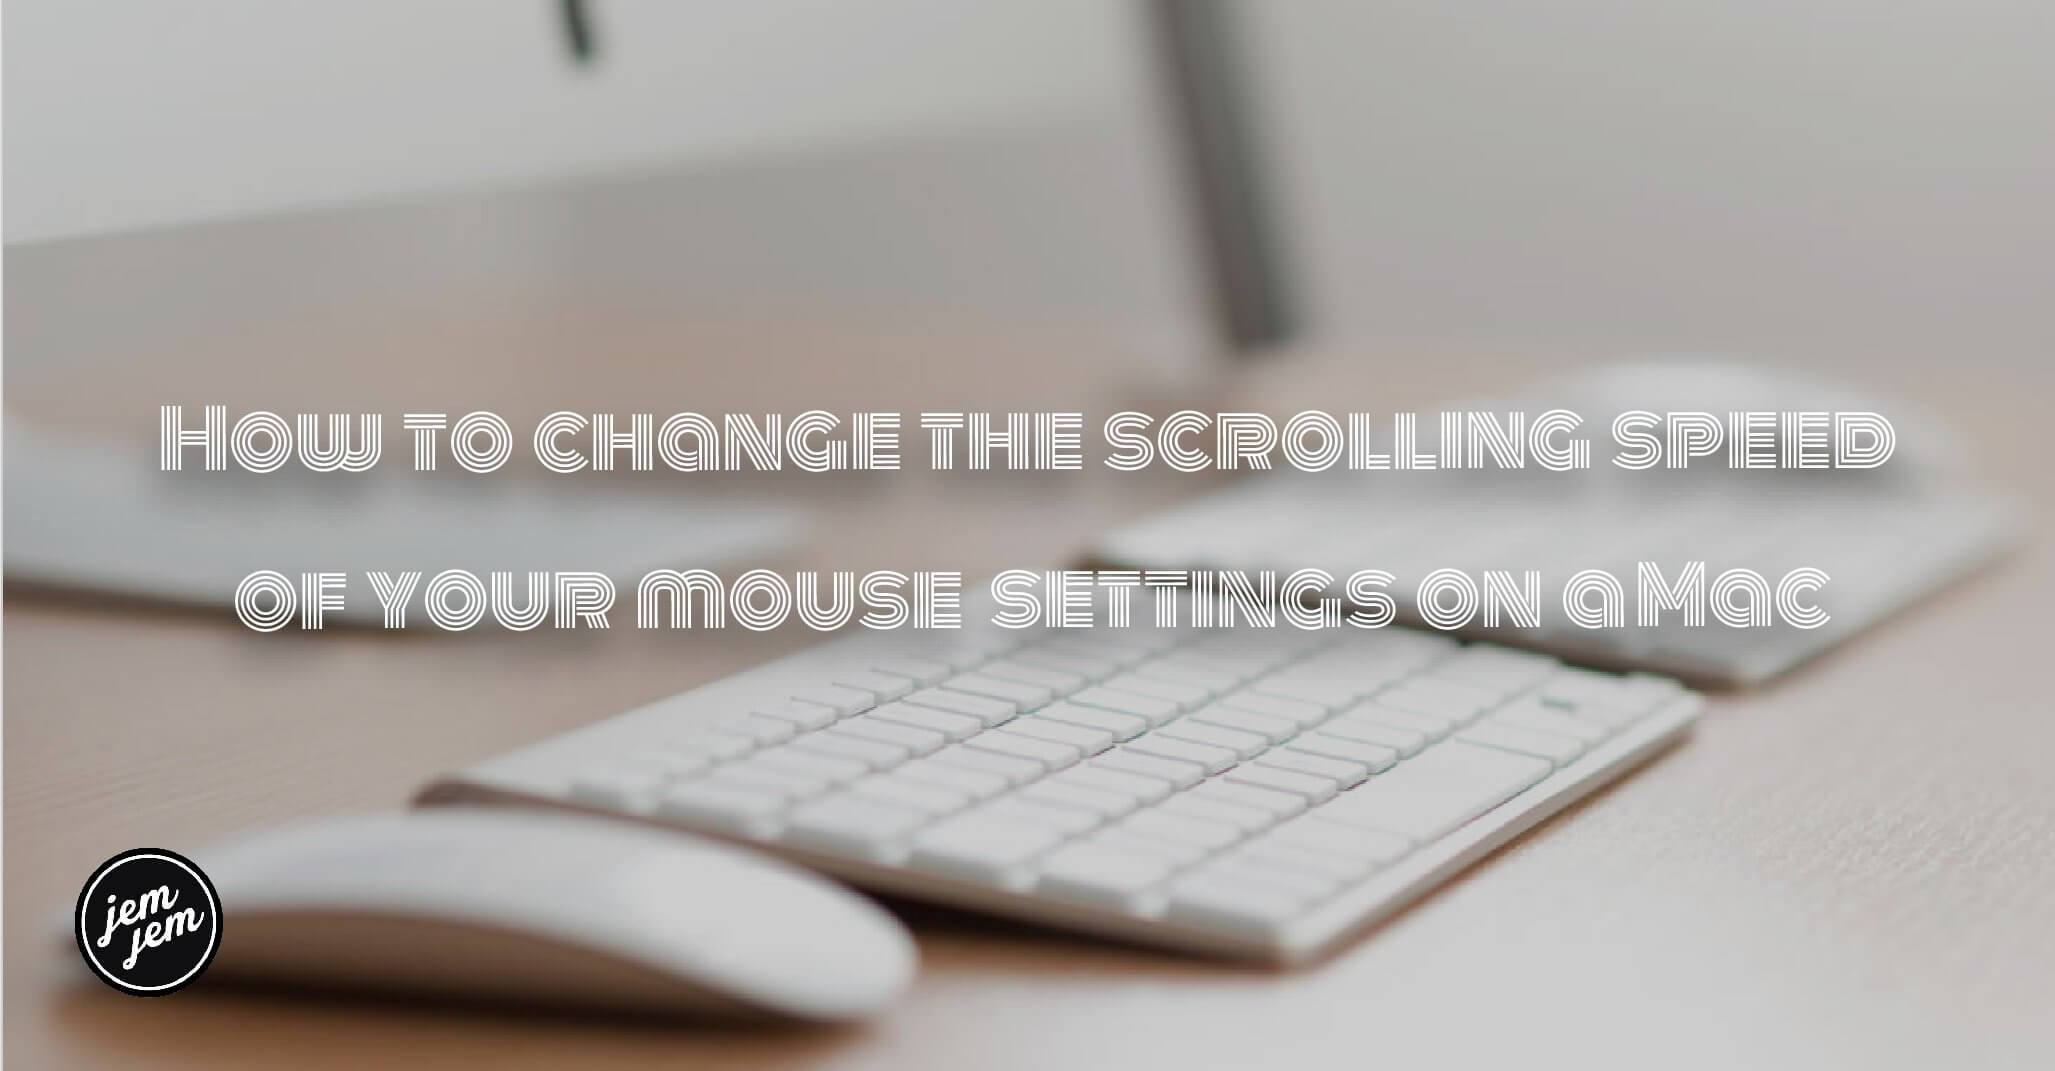 How to change the scrolling speed of your mouse settings on a Mac